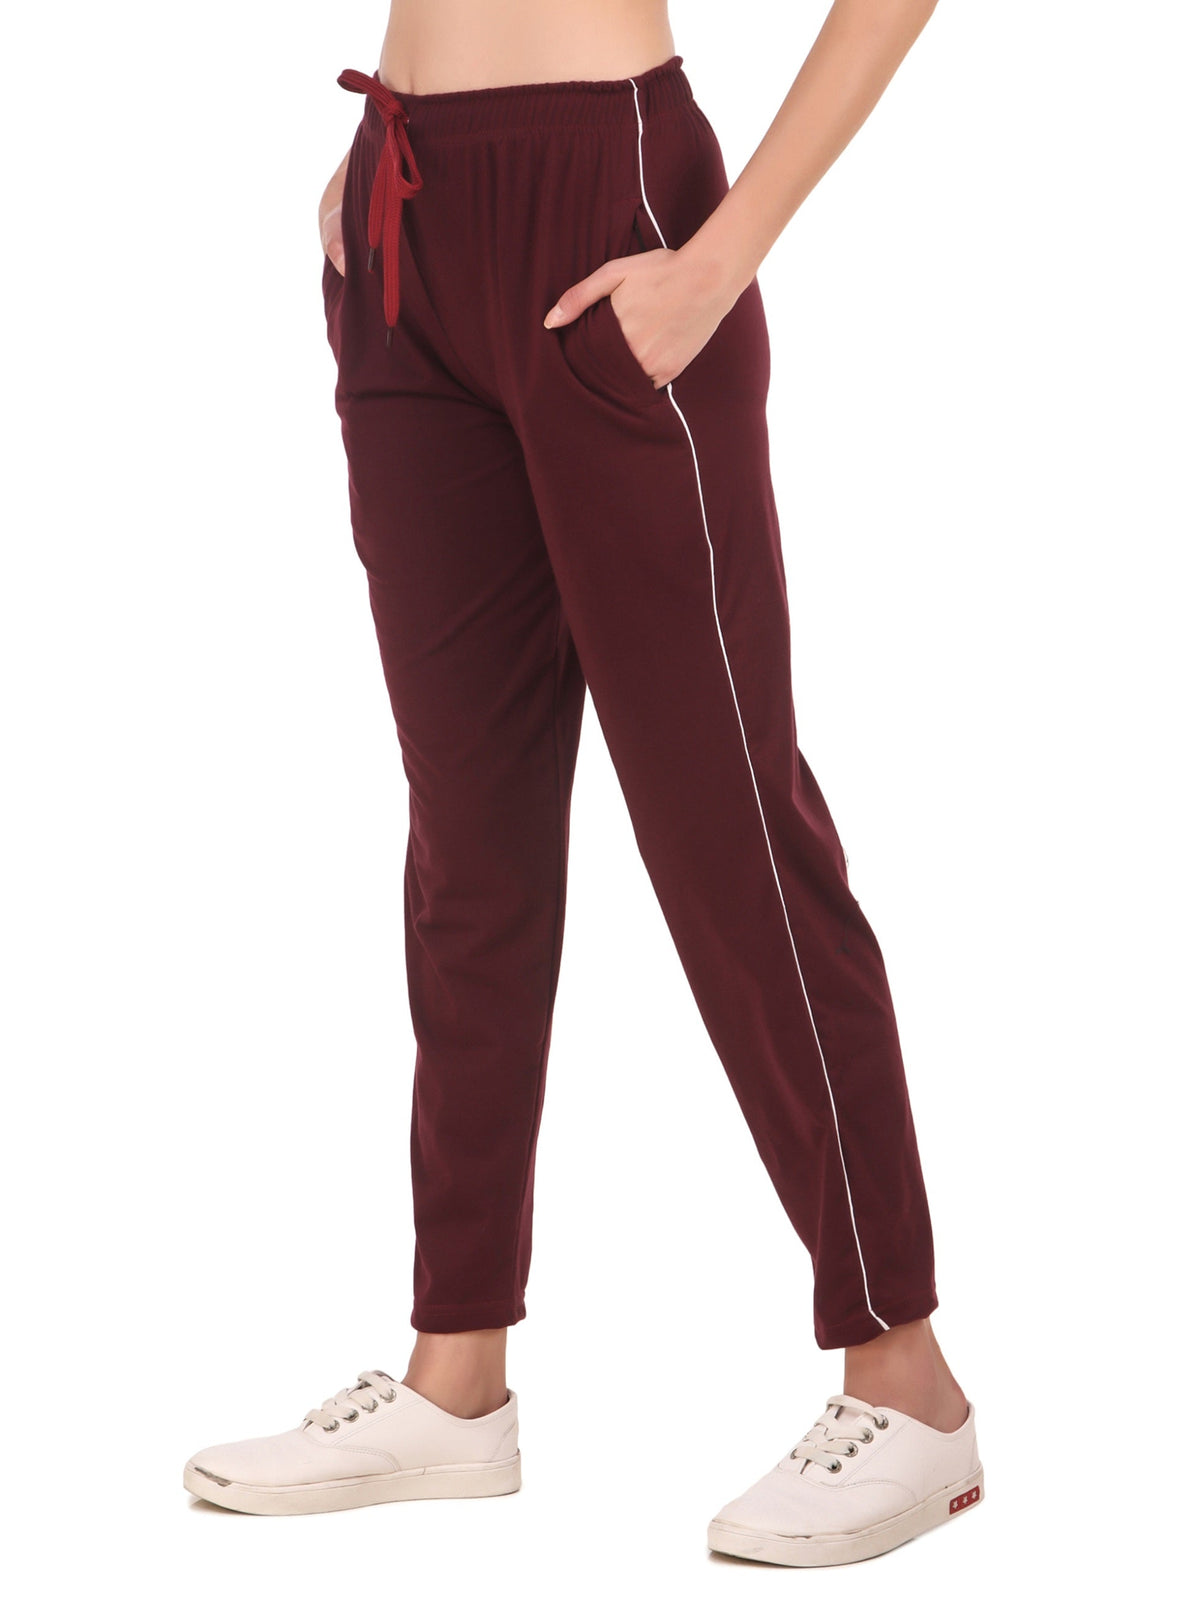 Women's Stretchable Yoga Gym Legging Pants with 2 Pockets